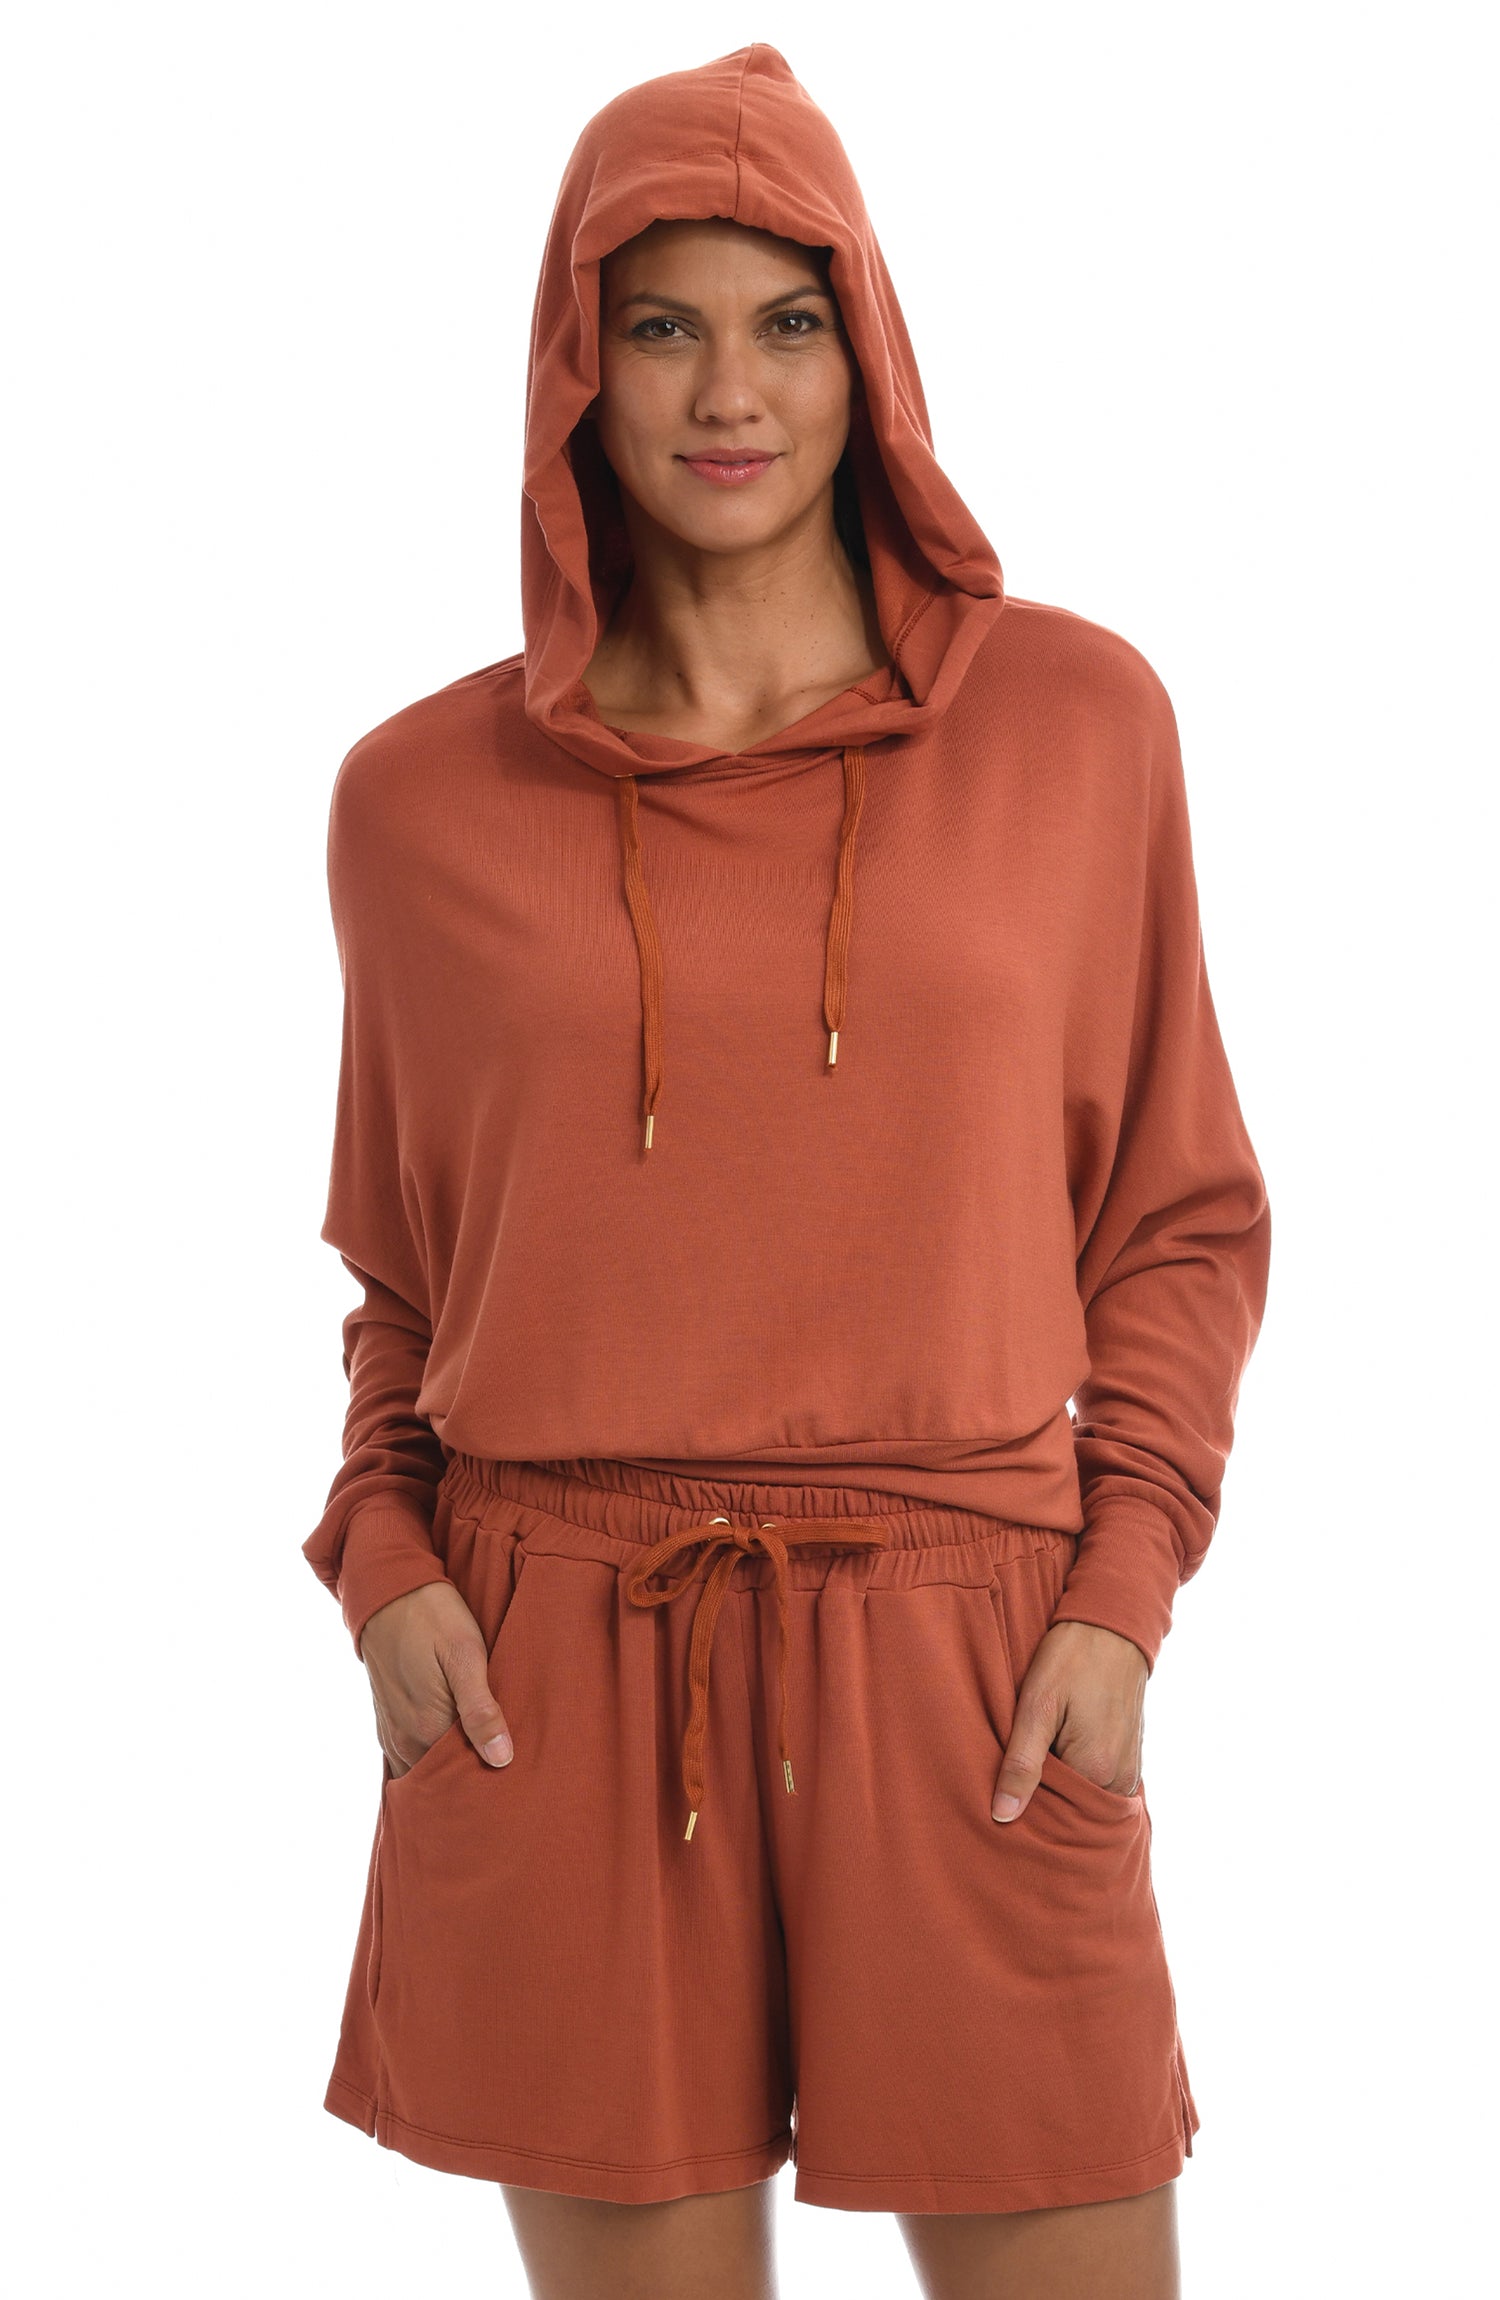 Model is wearing a clay colored french hooded sweat shirt from our Cozy Knit collection!